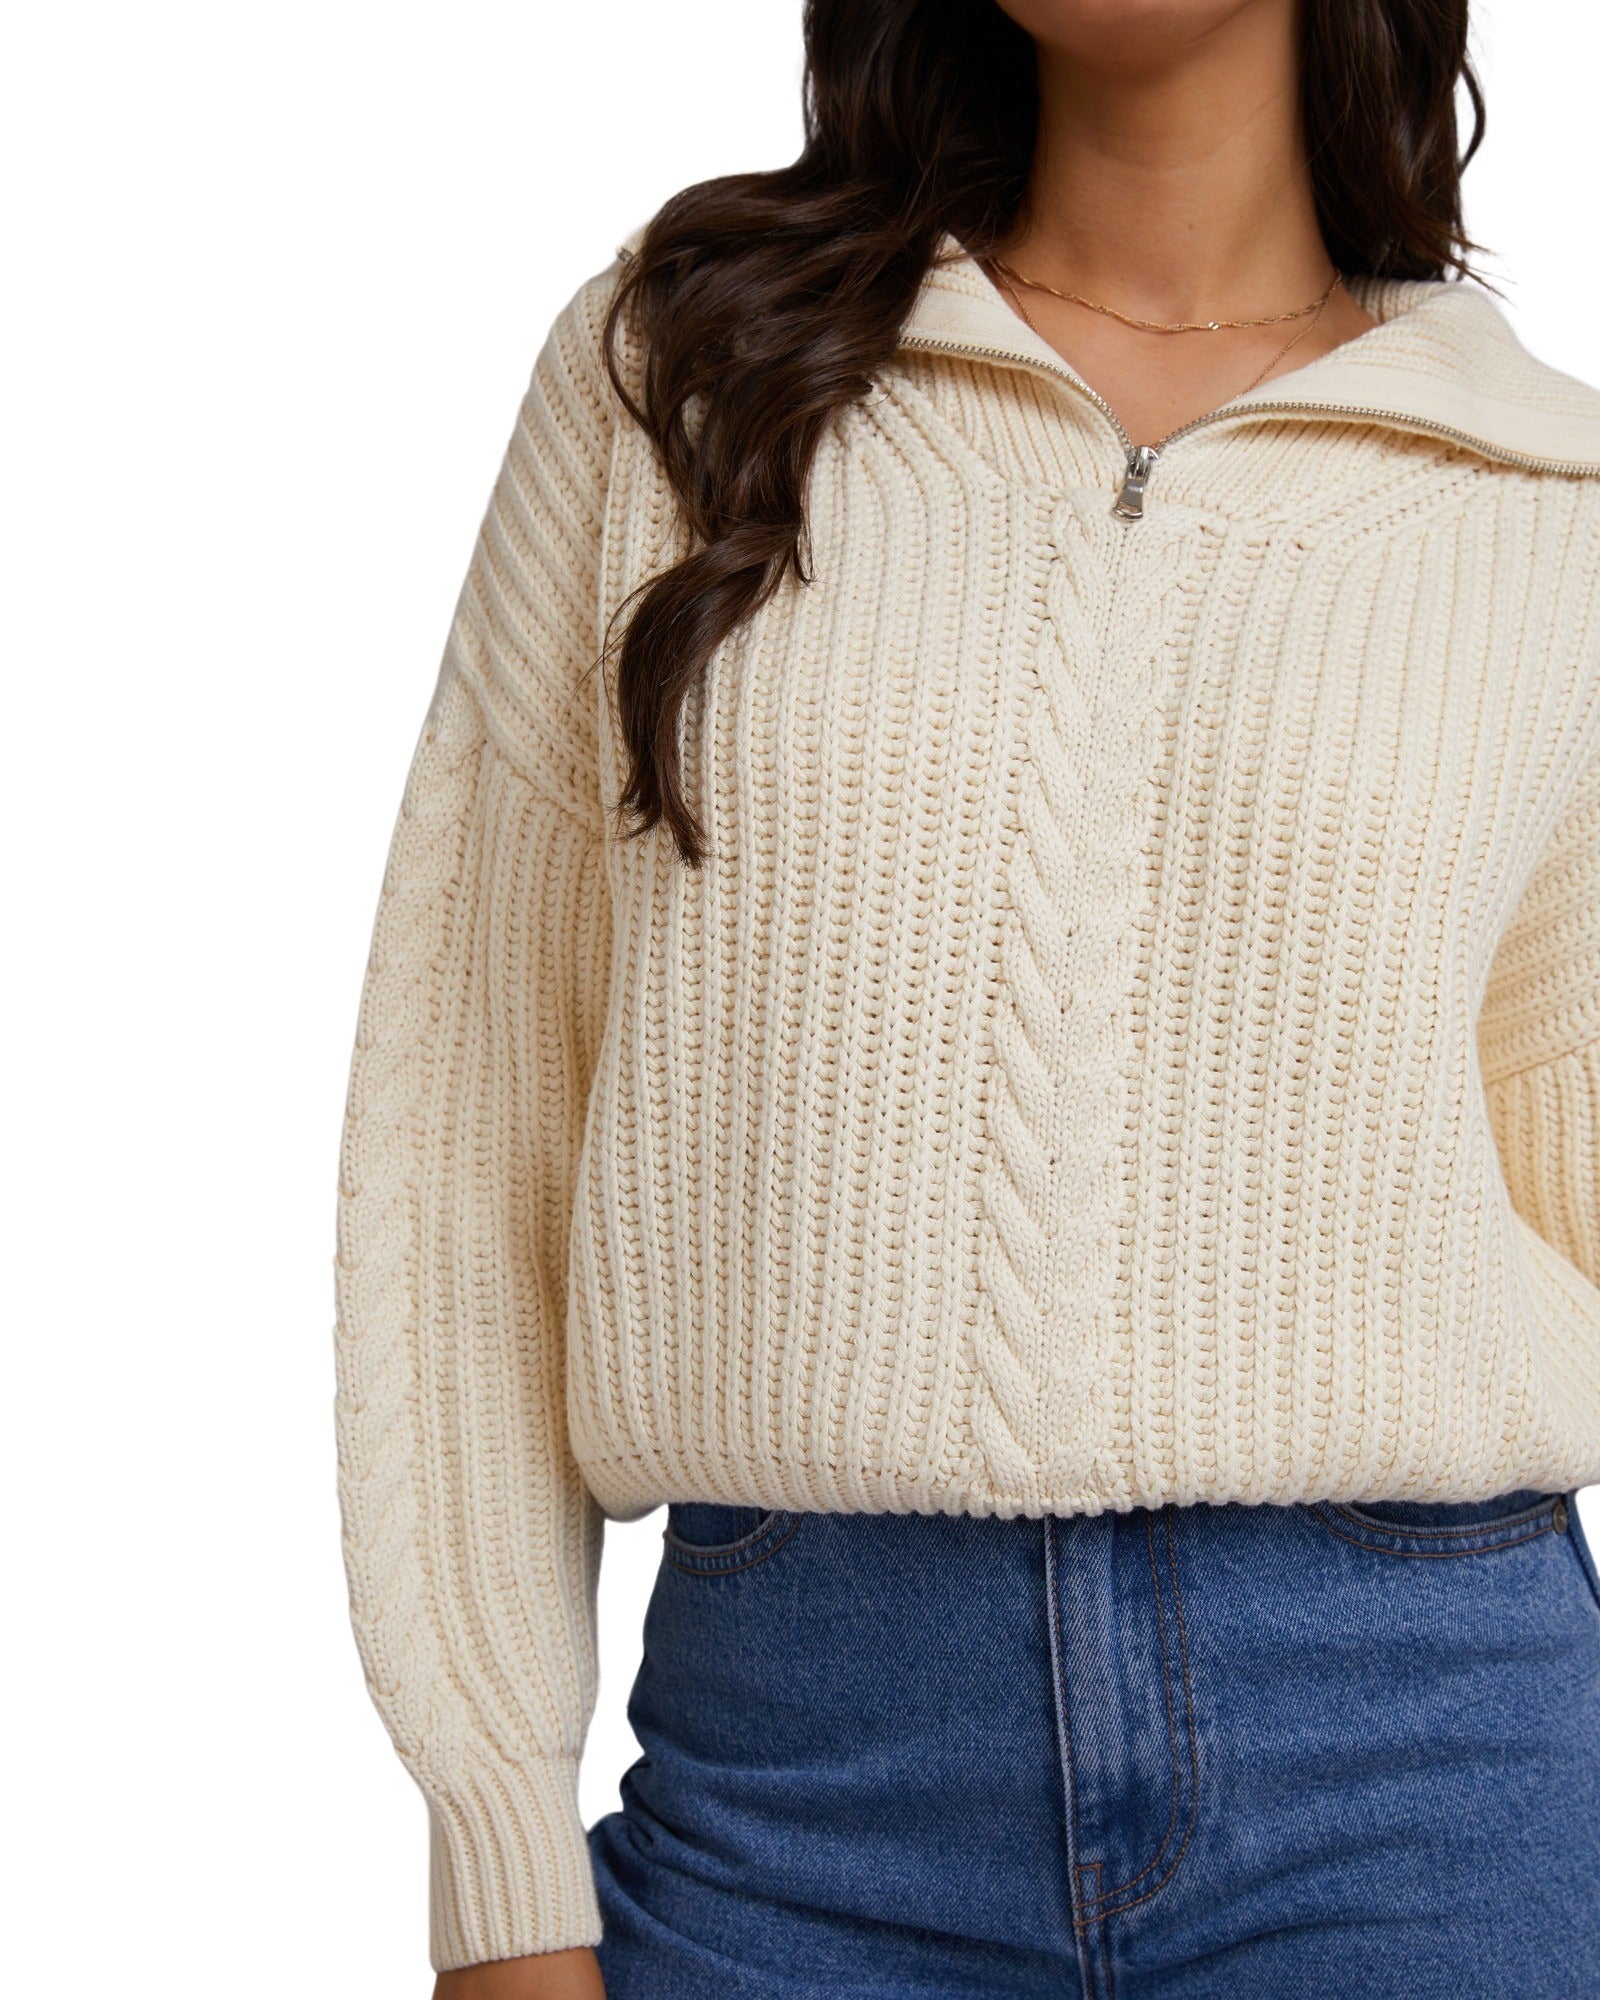 All About Eve - Dahlia 1/4 Zip Knit - Vintage White